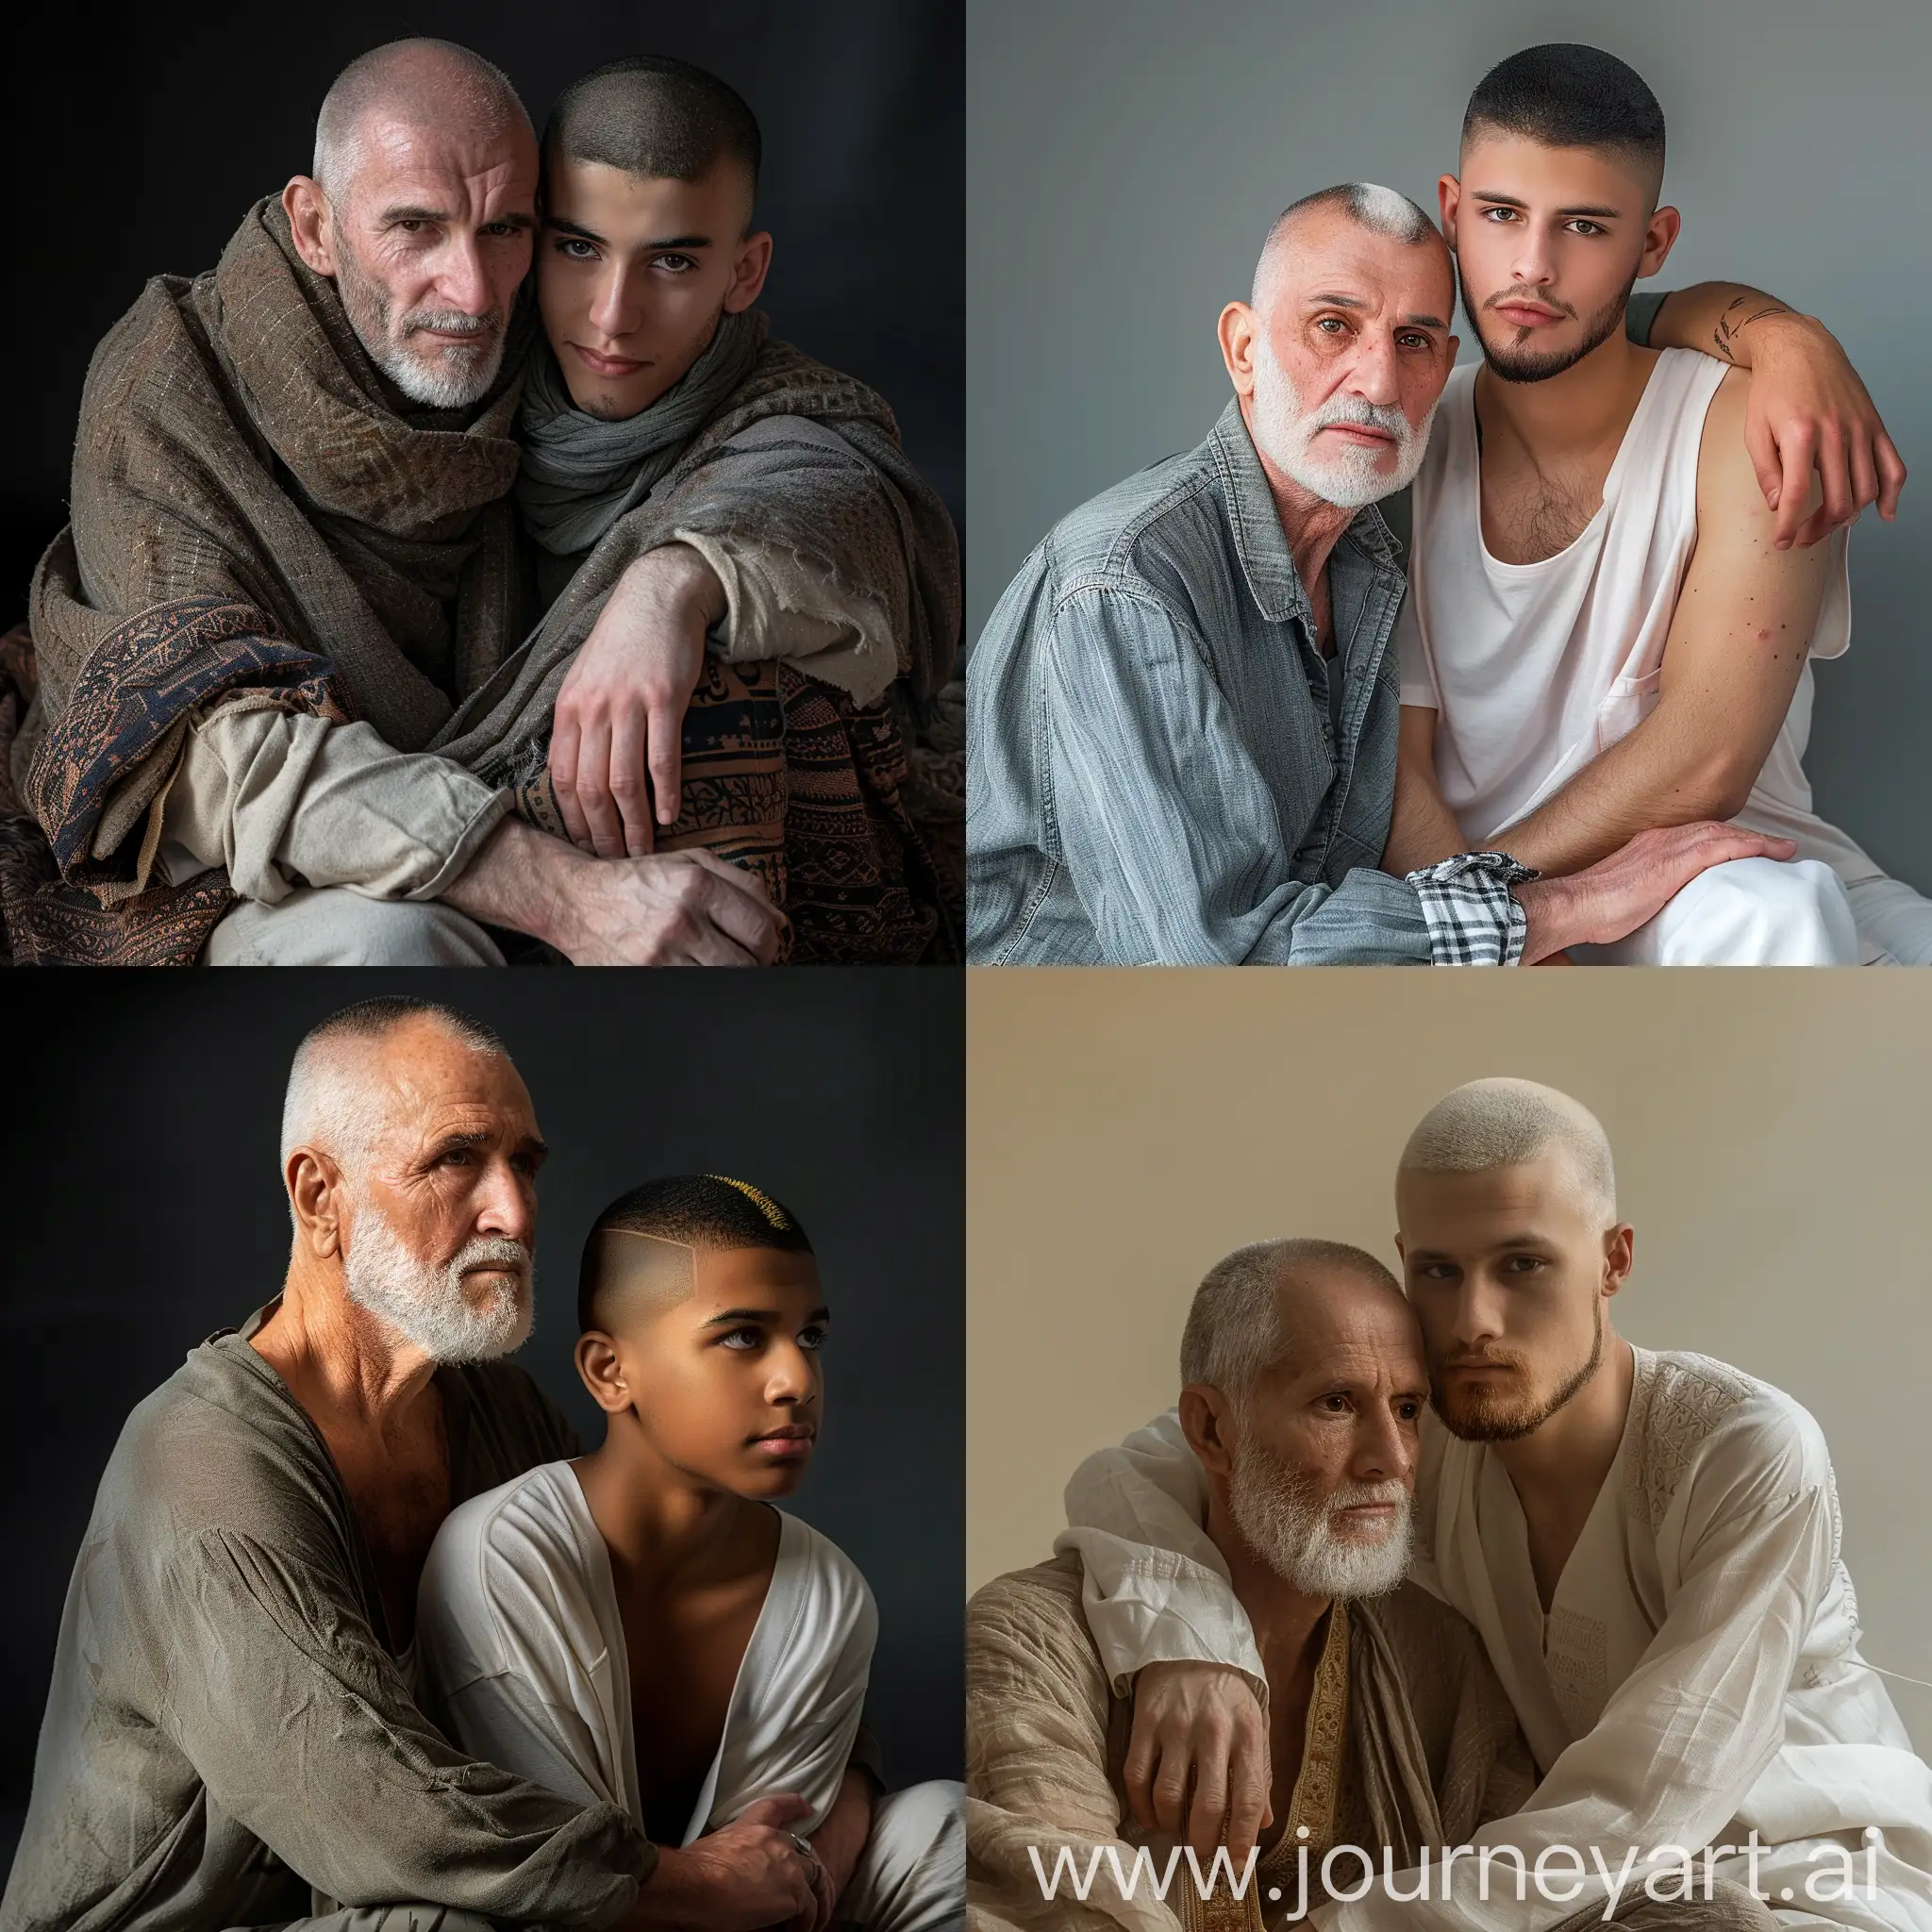 57 years old white scottish man with a shaved beard wearing, his young boyfriend is 22 years old from Saudi Arabia with a fade skin haircut and and sitting 